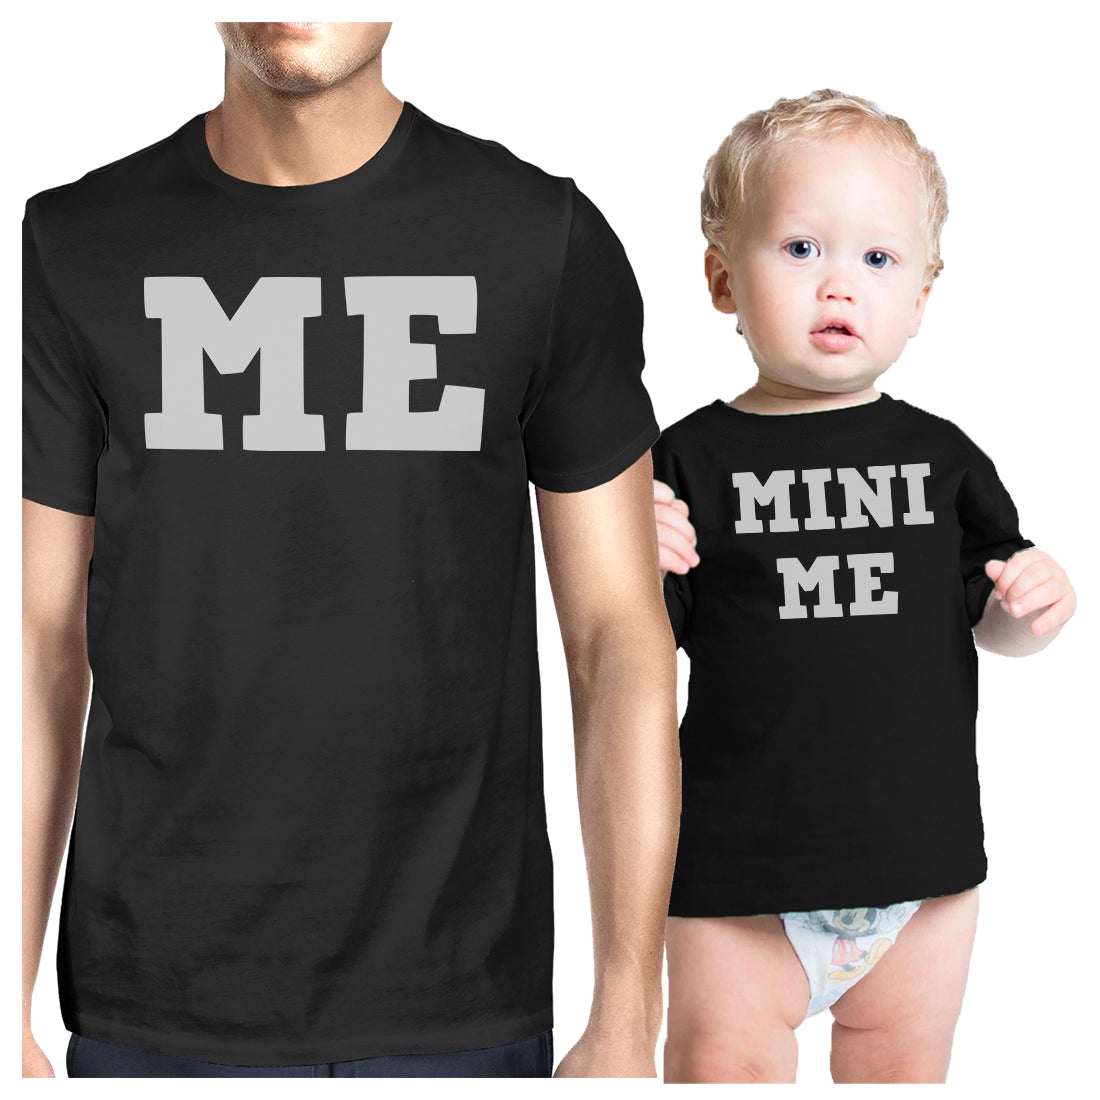 Mini Me Dad and Baby Matching Gift T-Shirts For New Dad Gifts Black